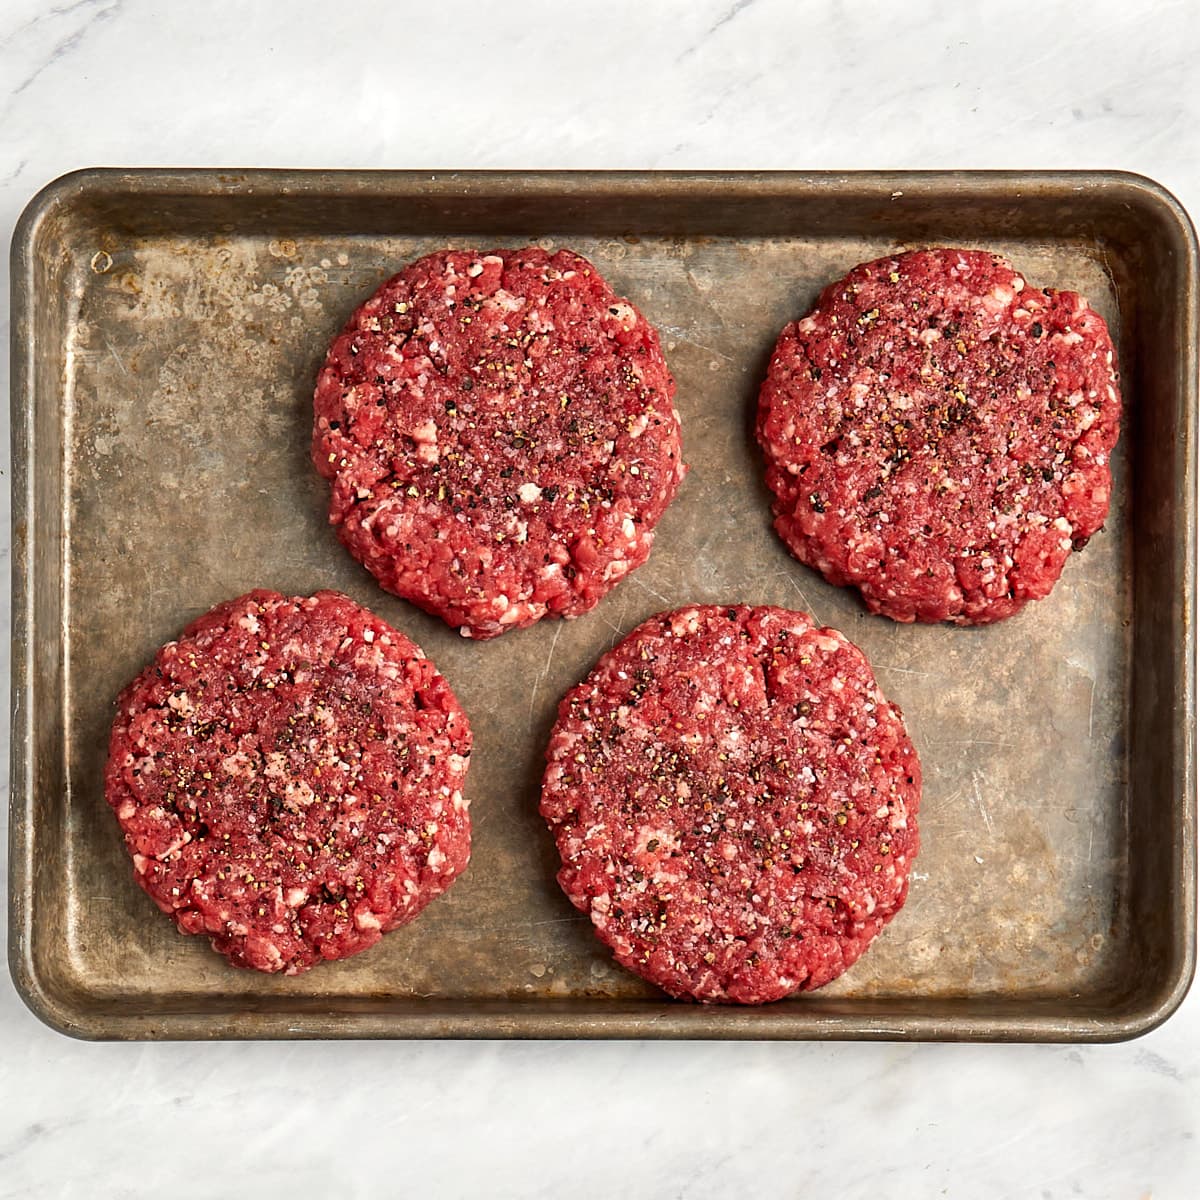 4 burger patties with salt and pepper on a baking sheet.